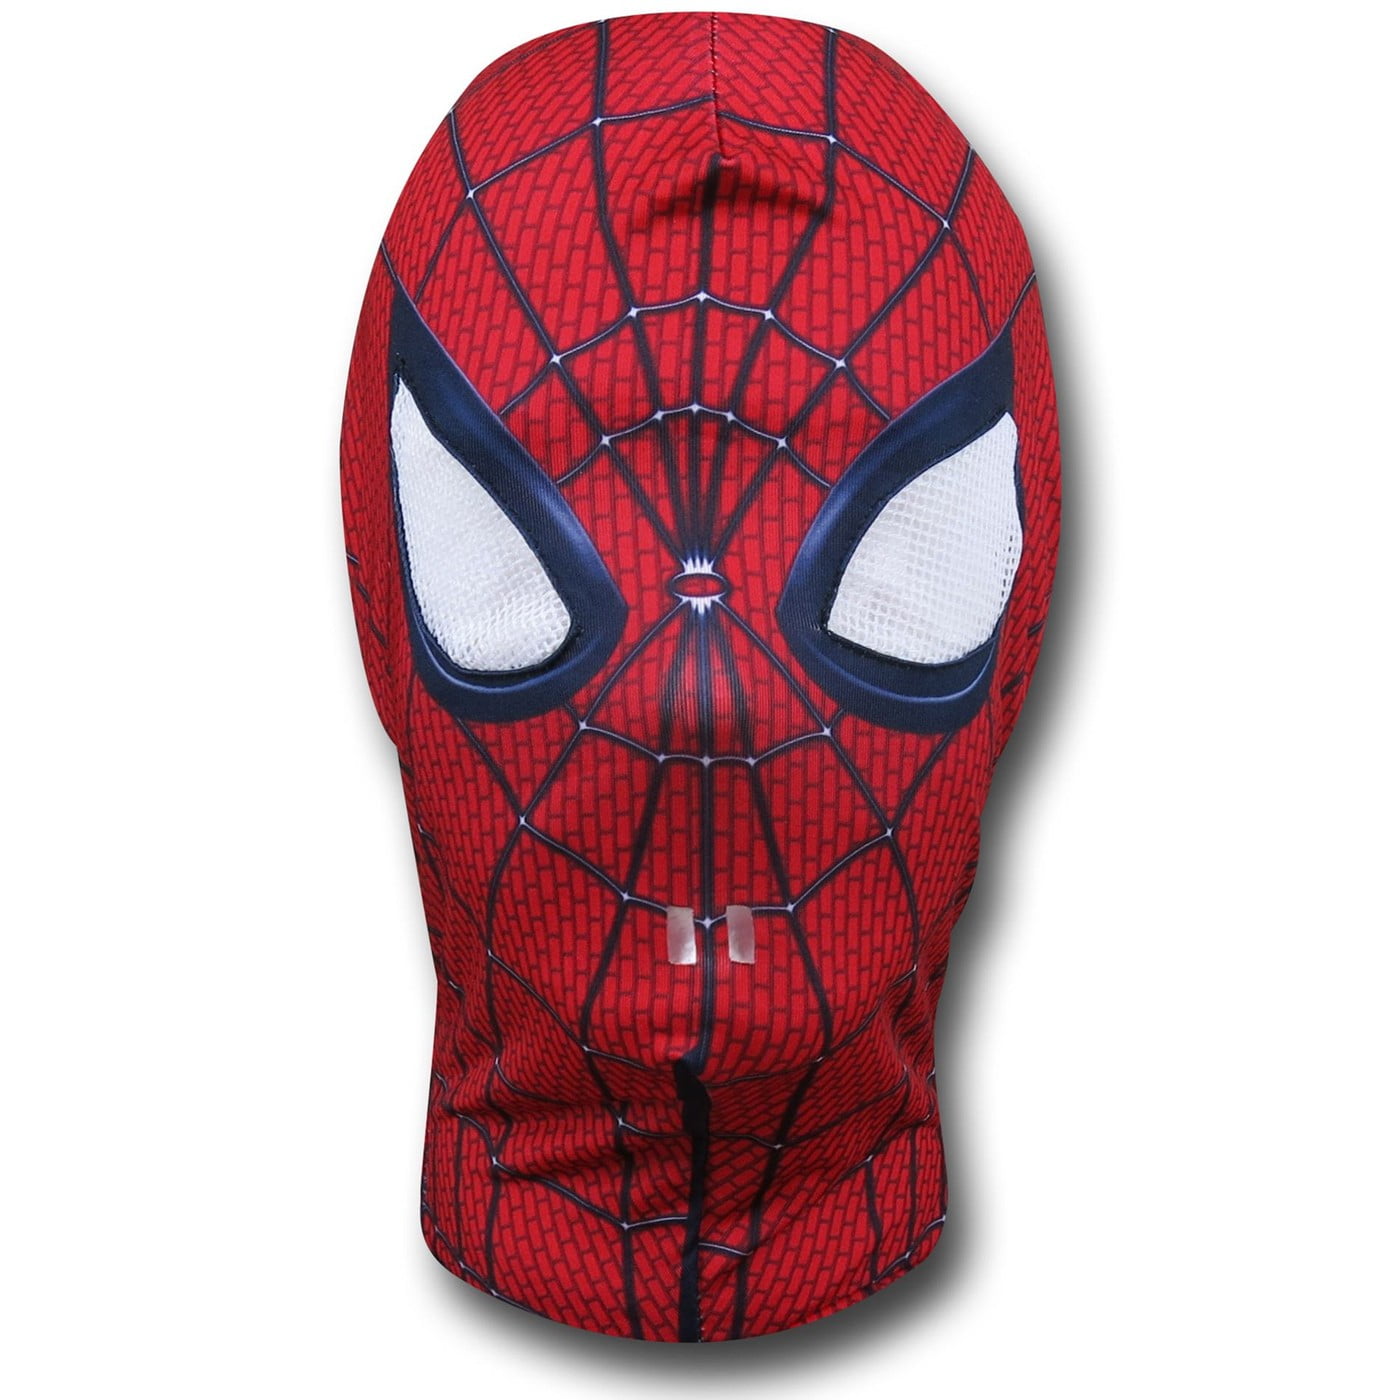 Avengers Spiderman LED Mask Light Up Cosplay Custome Accs Party Christmas Mask 